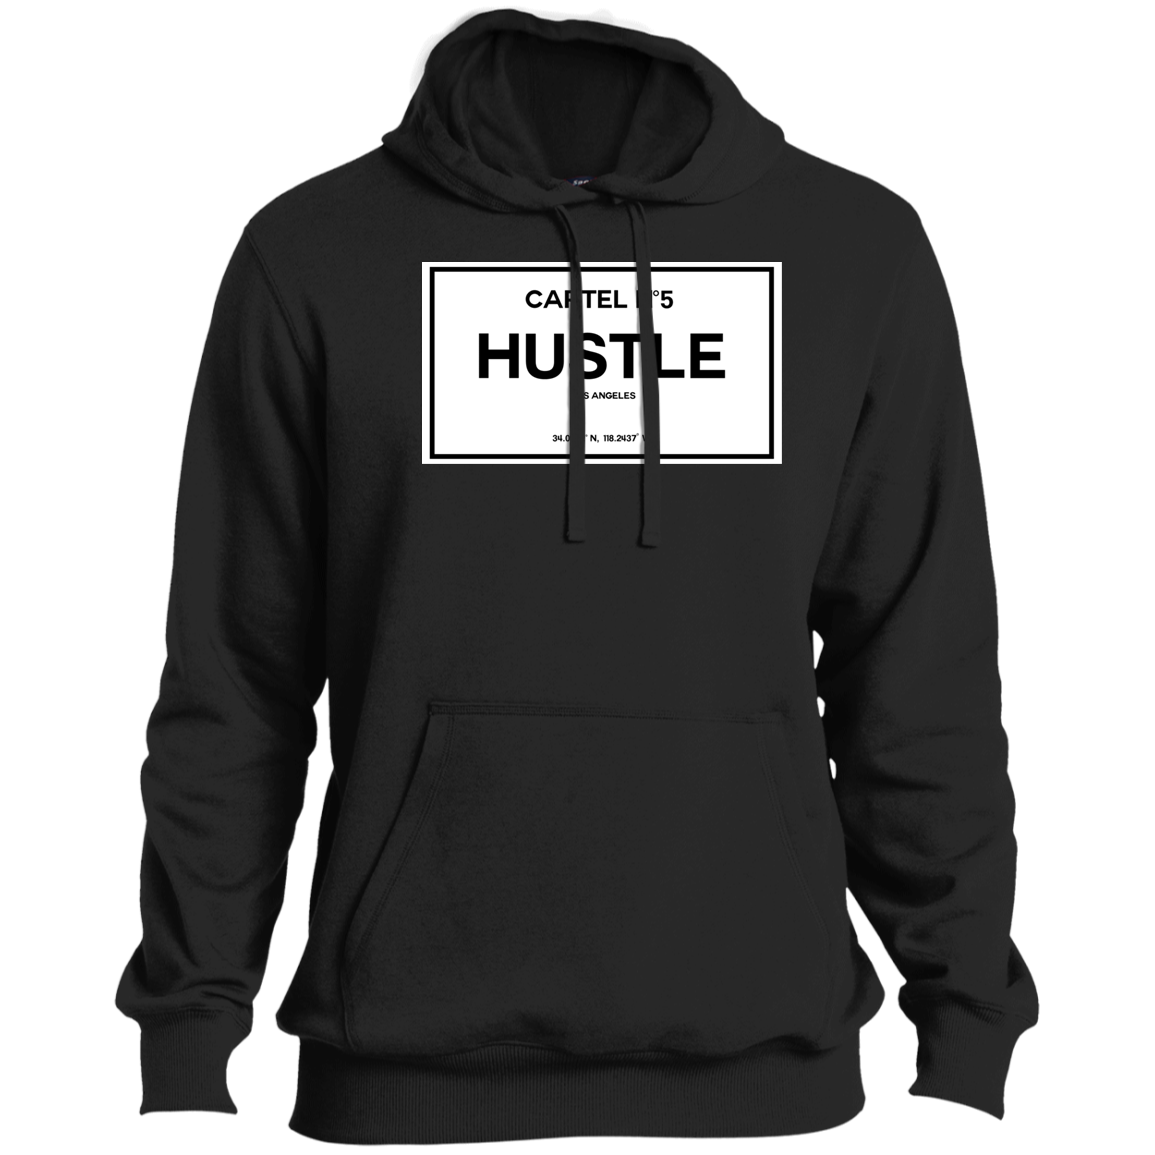 Cartel No 5 Hustle Tall Pullover Hoodie